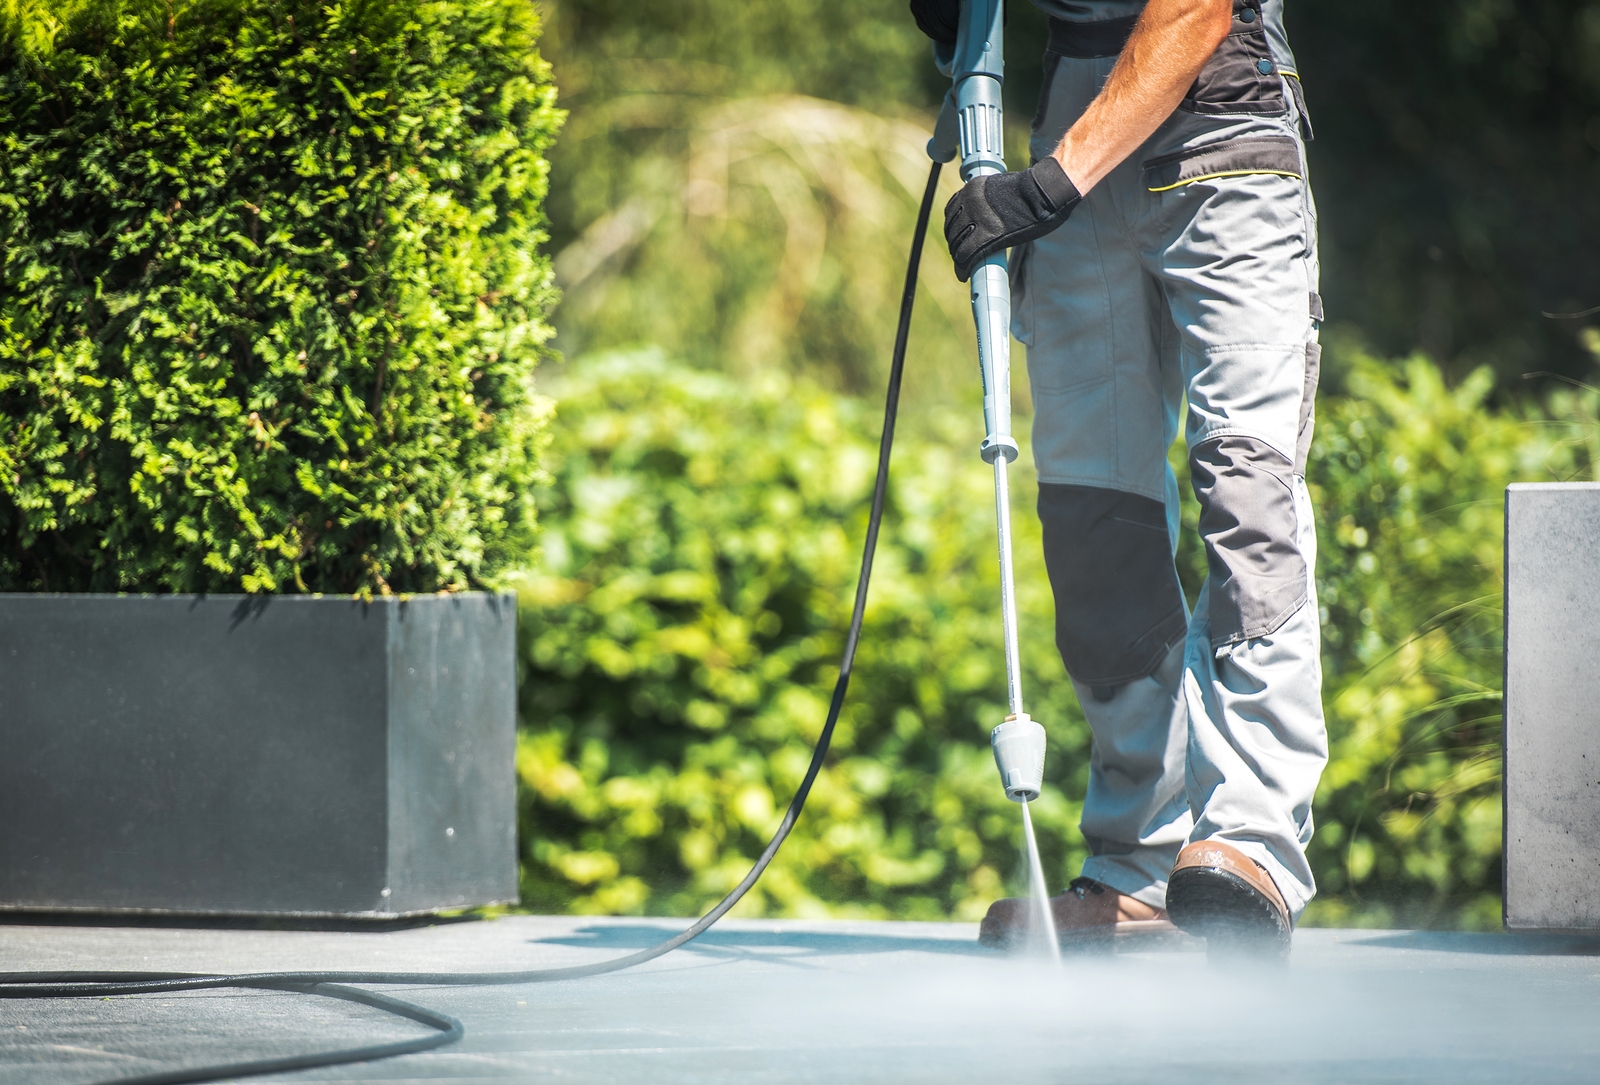 Tips for Using Pressure Washer at Its Best